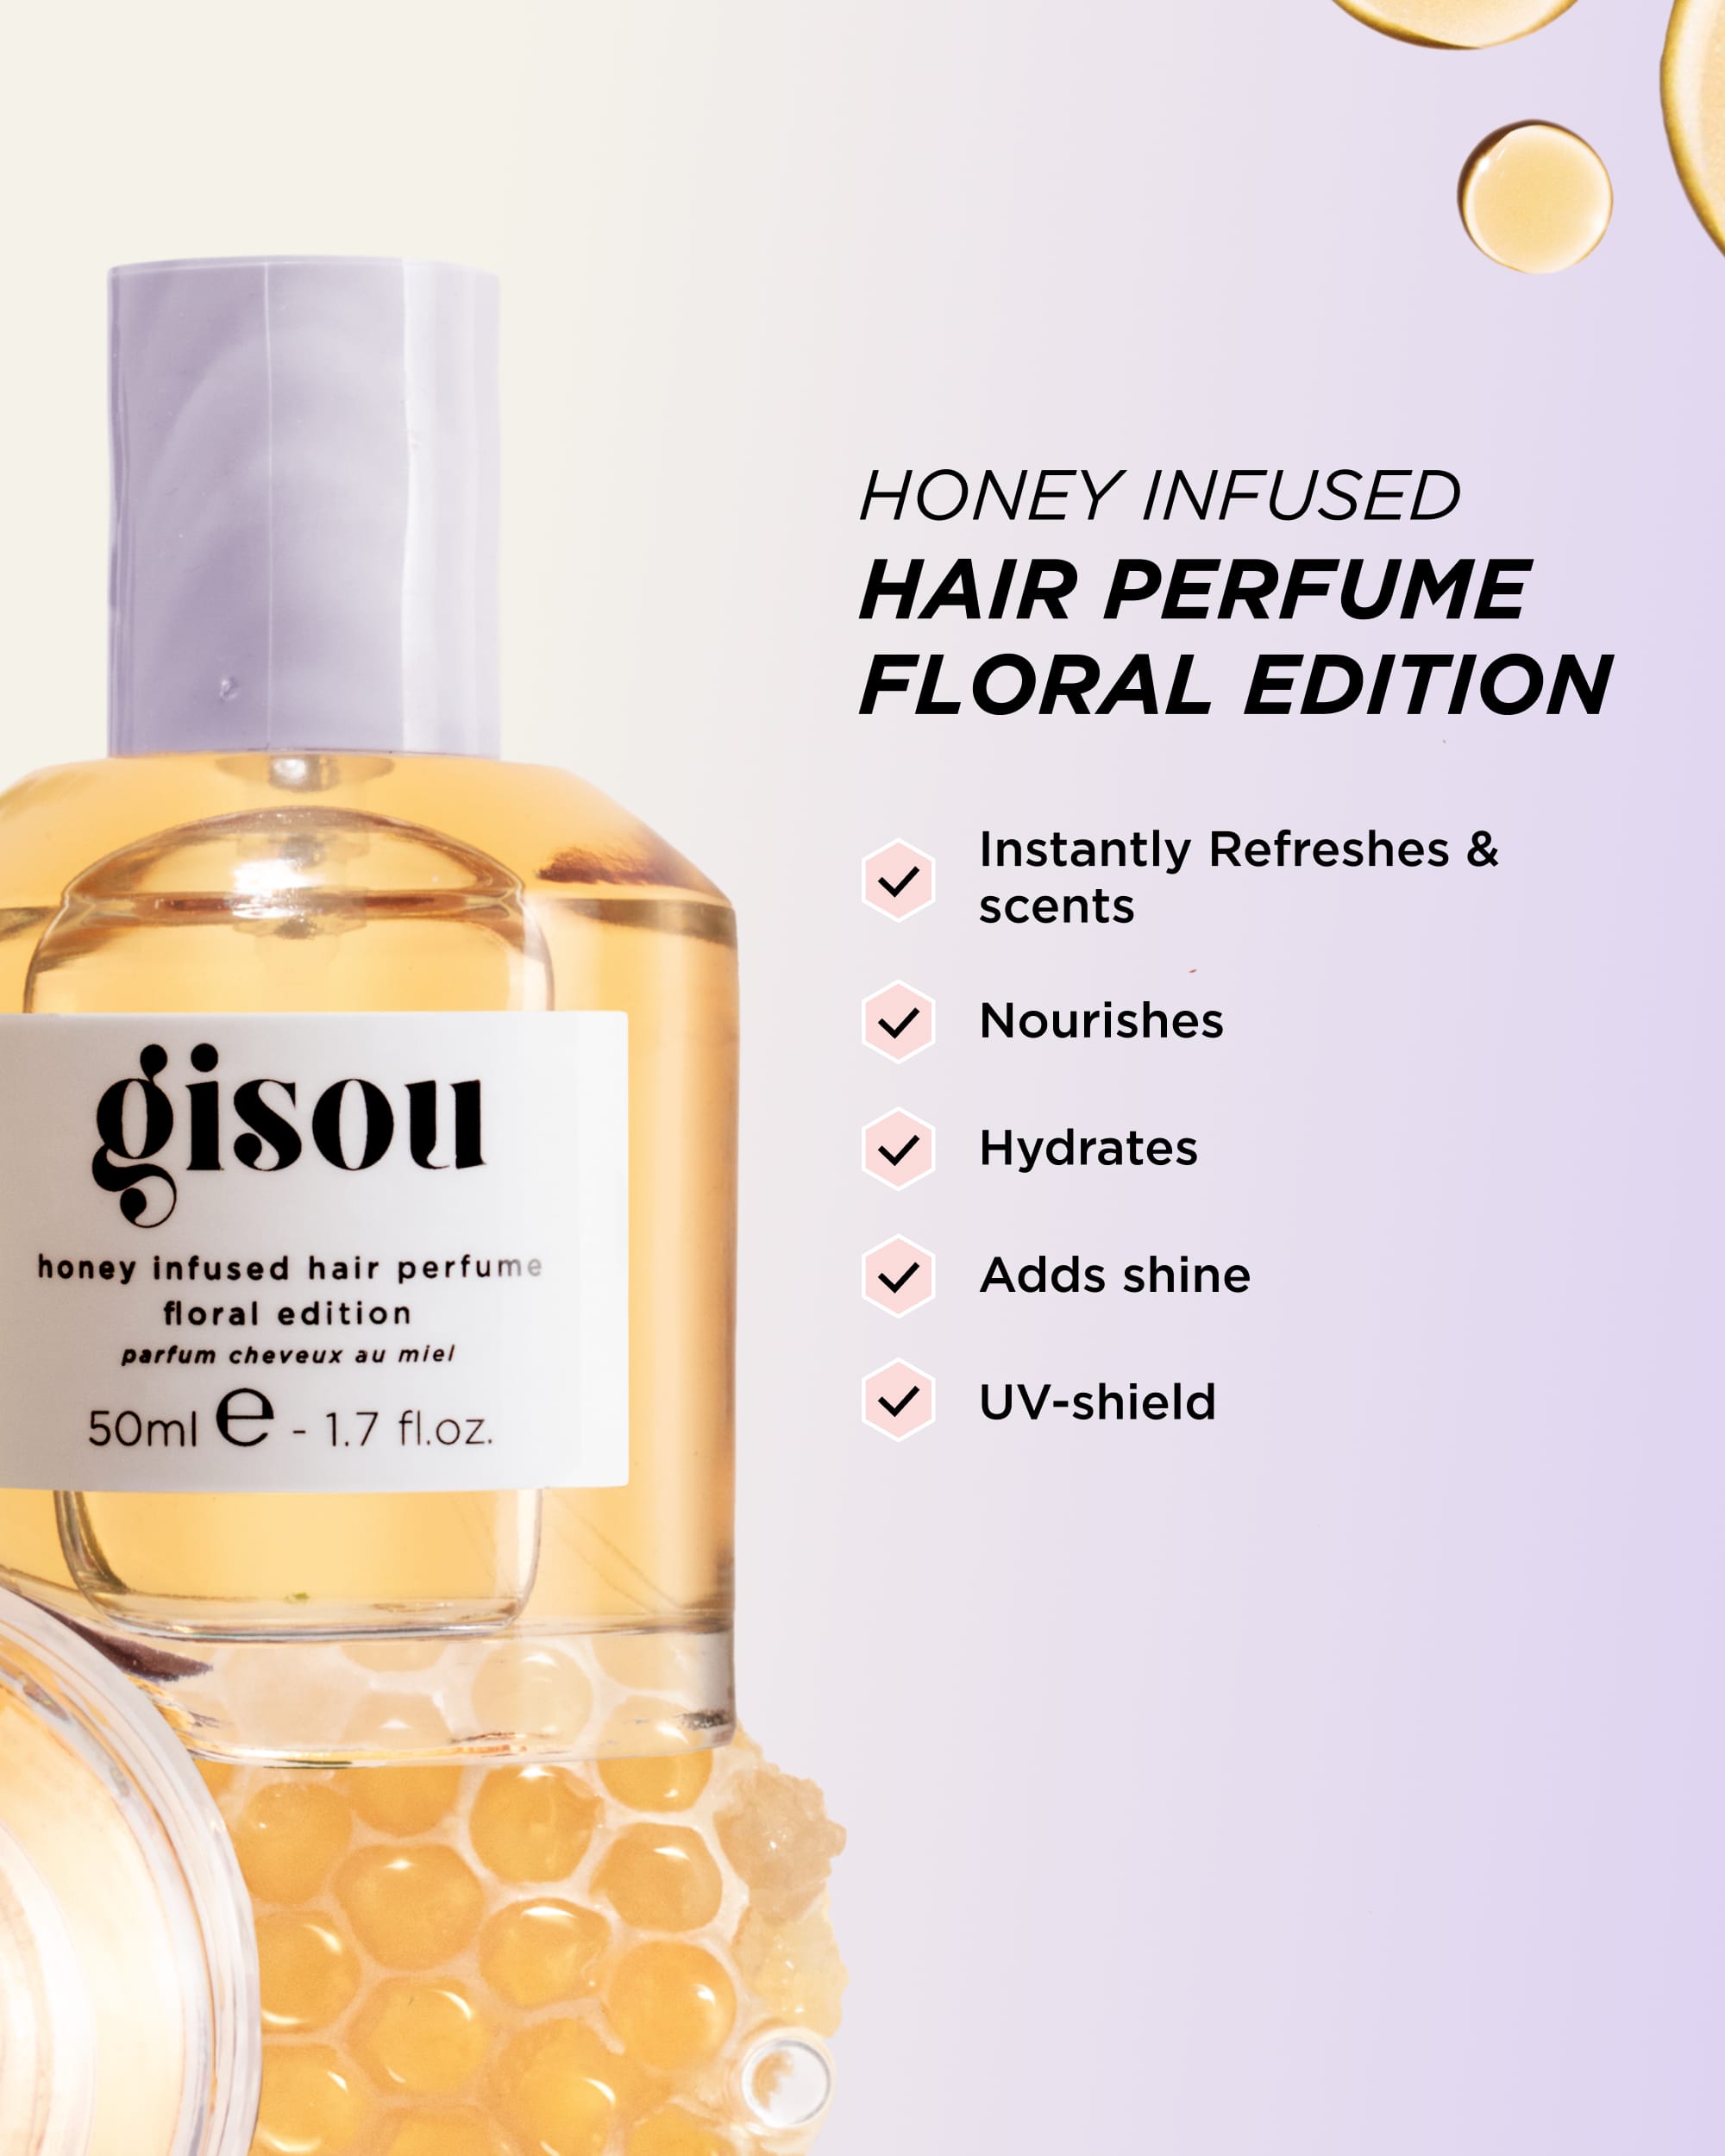 Honey Infused Hair Perfume  Scent  Hydrate Your Hair  Gisou